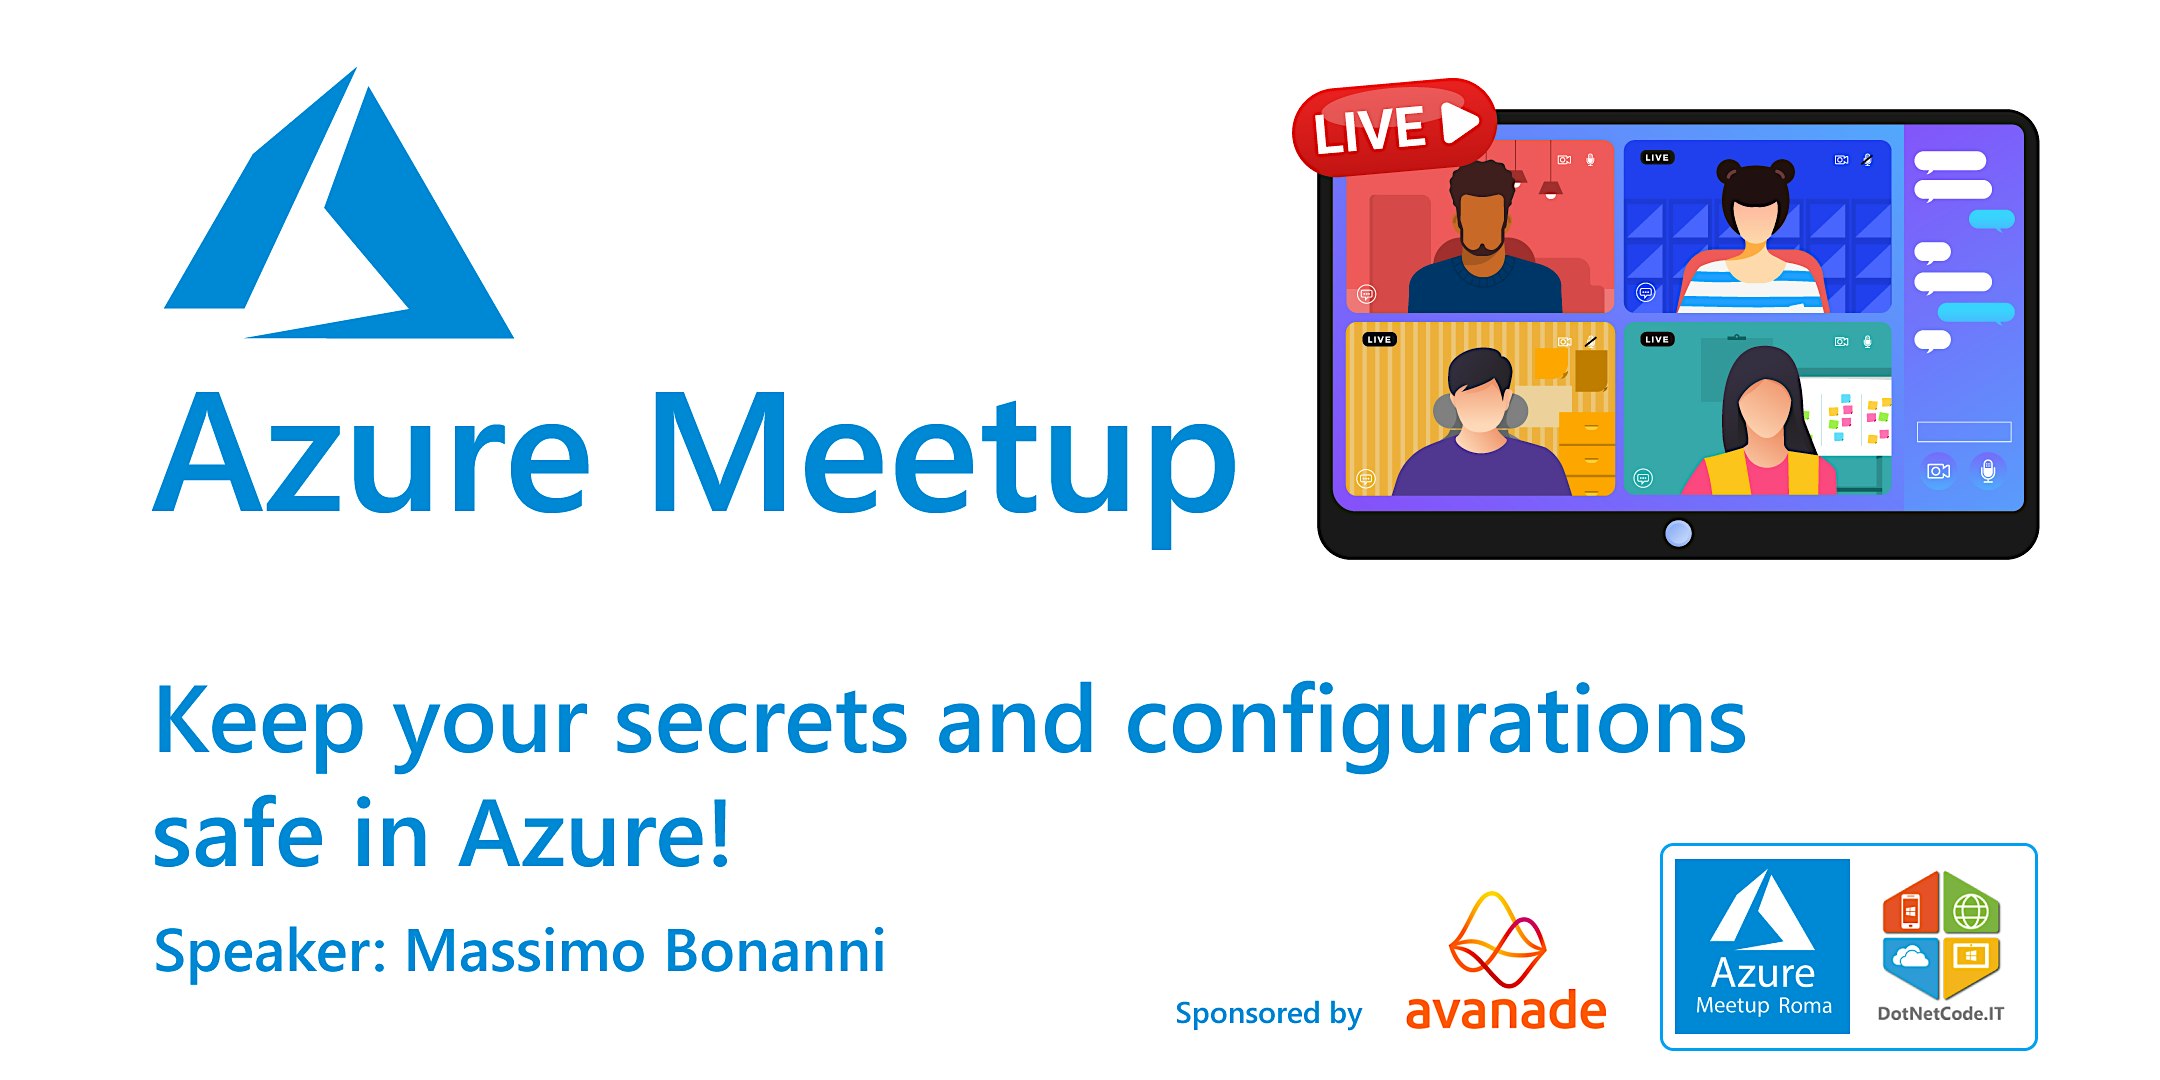 Azure Meetup: Keep your secrets and configurations safe in Azure!